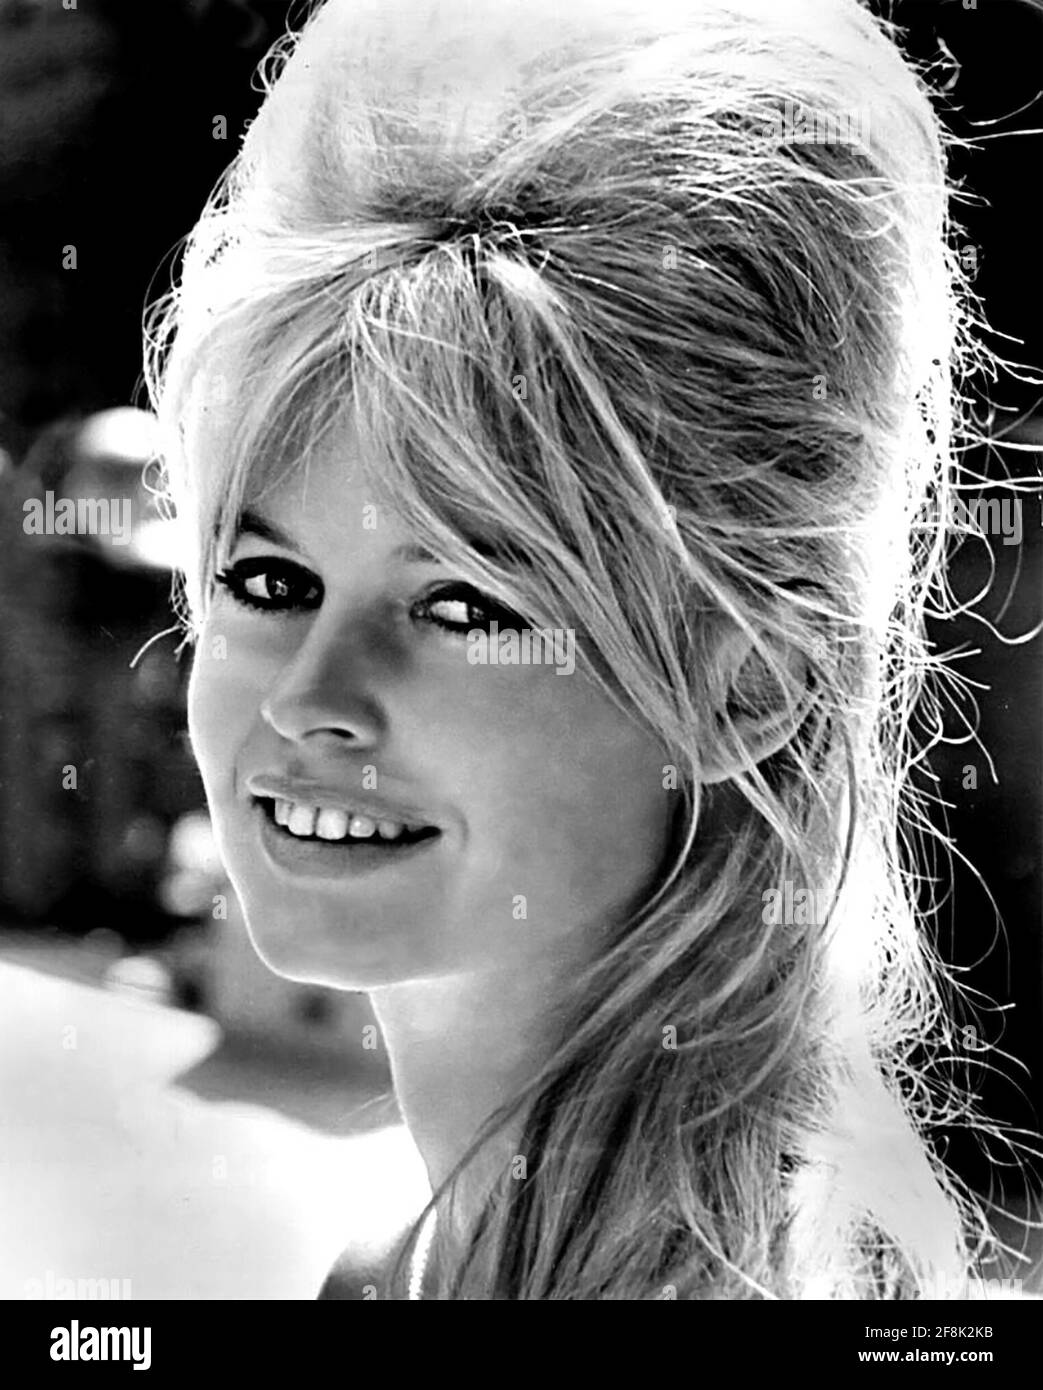 Brigitte Bardot. Portrait of the French animal rights campaigner and former actress, Brigitte Anne-Marie Bardot (b. 1934), publicity still for the film 'A Very Private Affair', 1962 Stock Photo